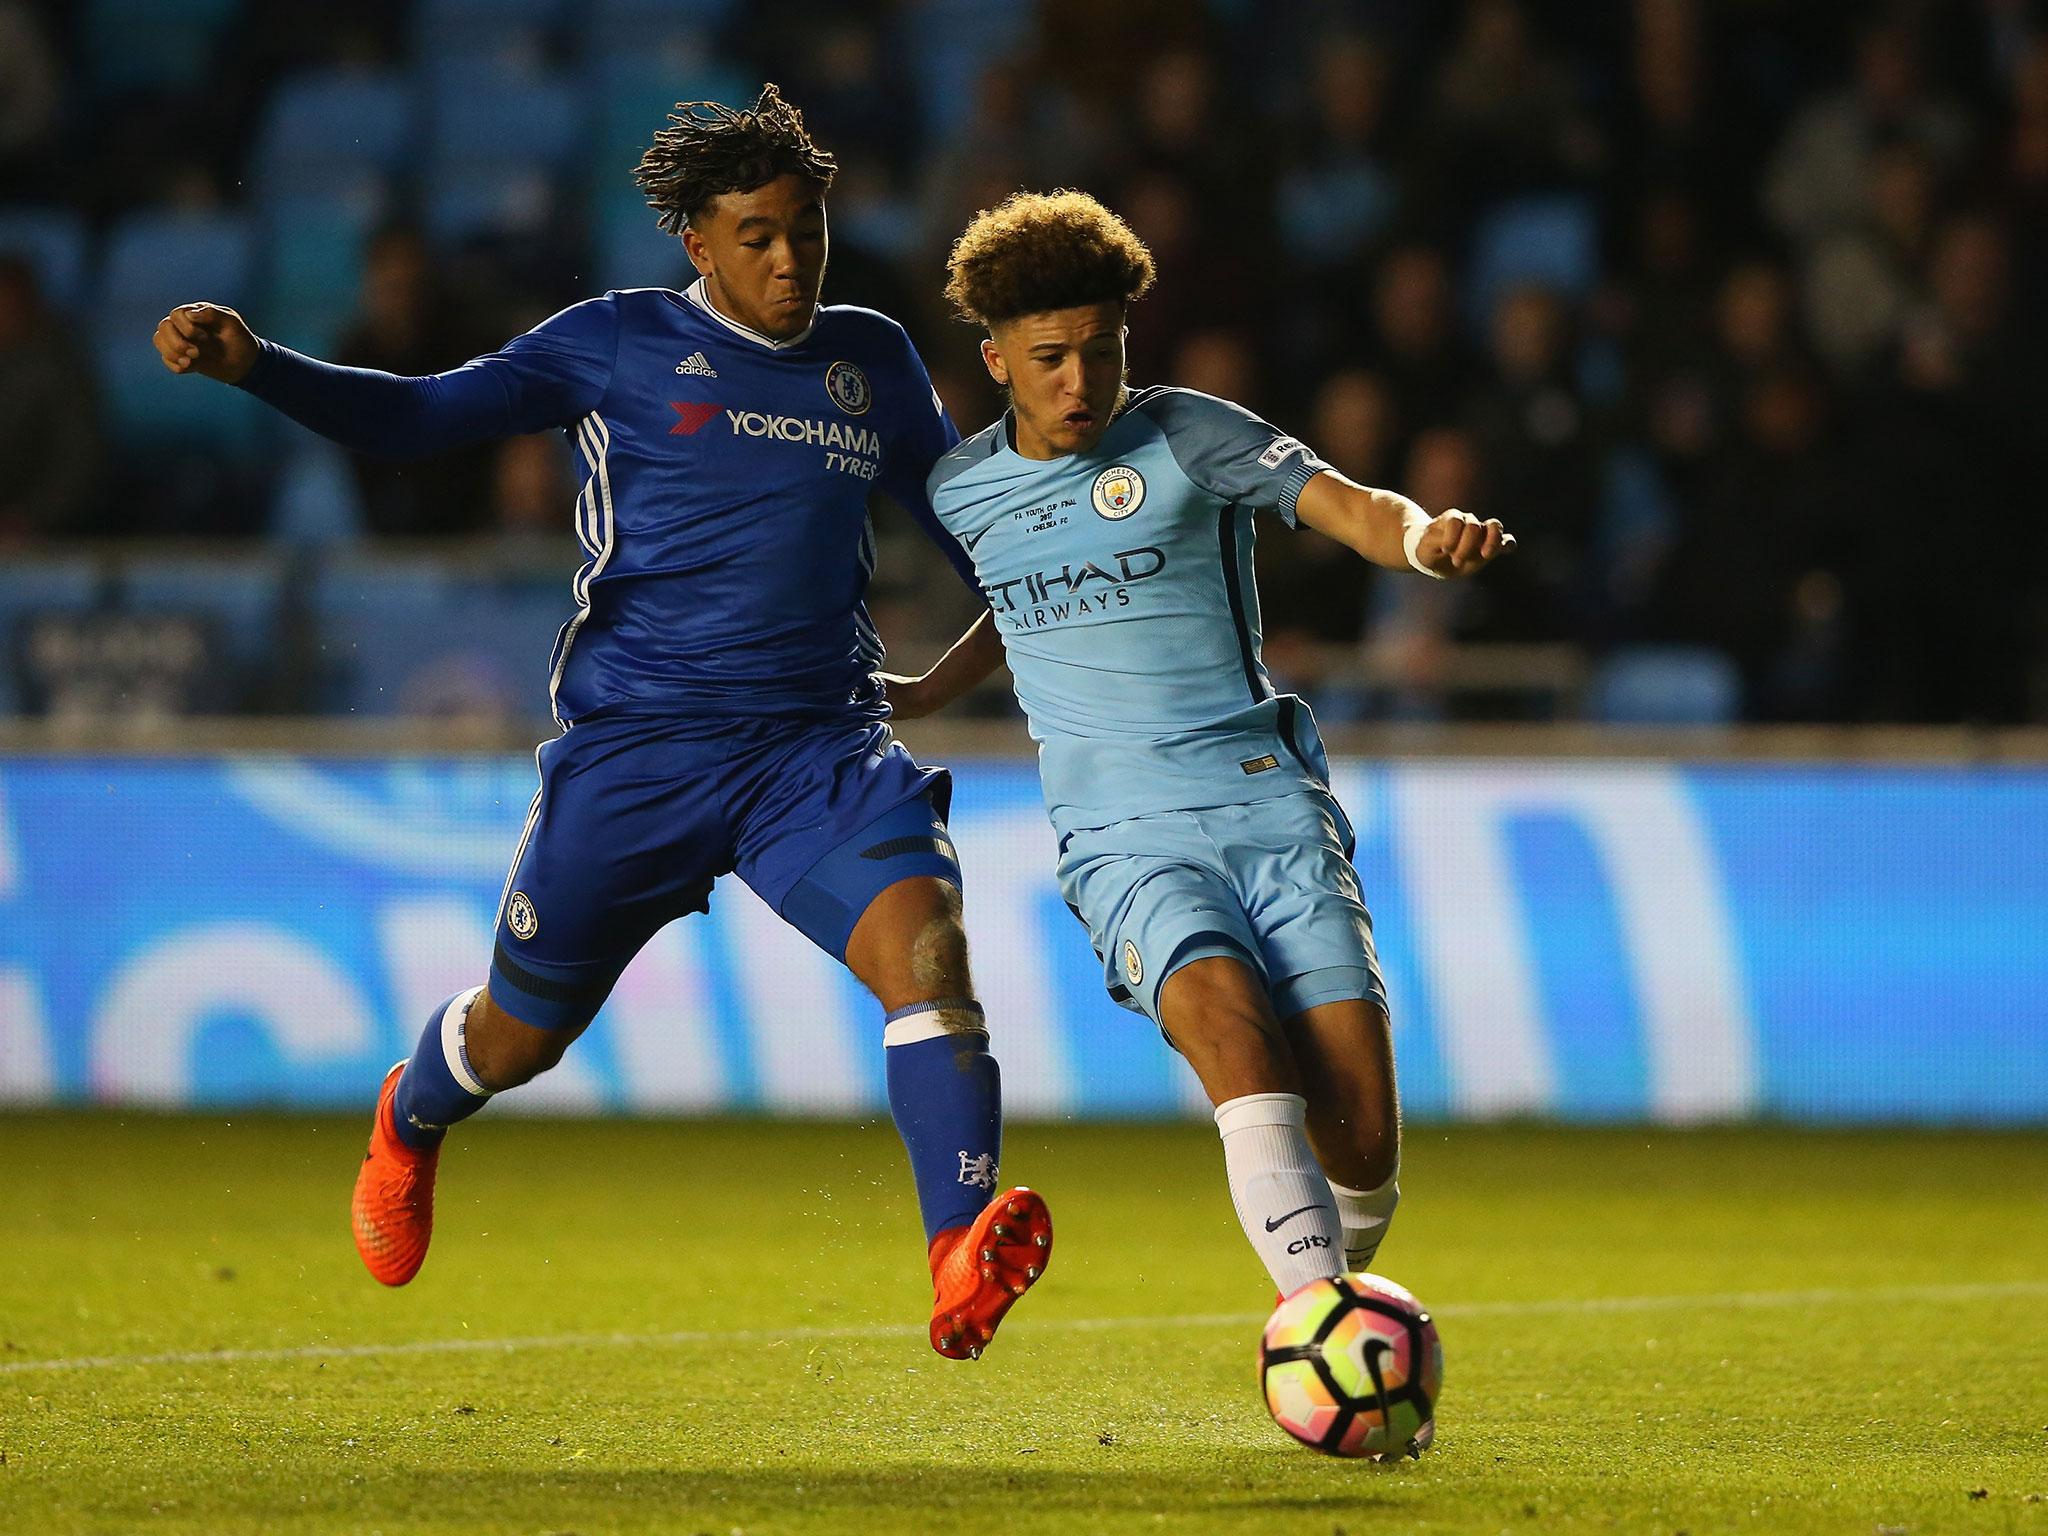 Jadon Sancho has one year left on his scholarship deal at City